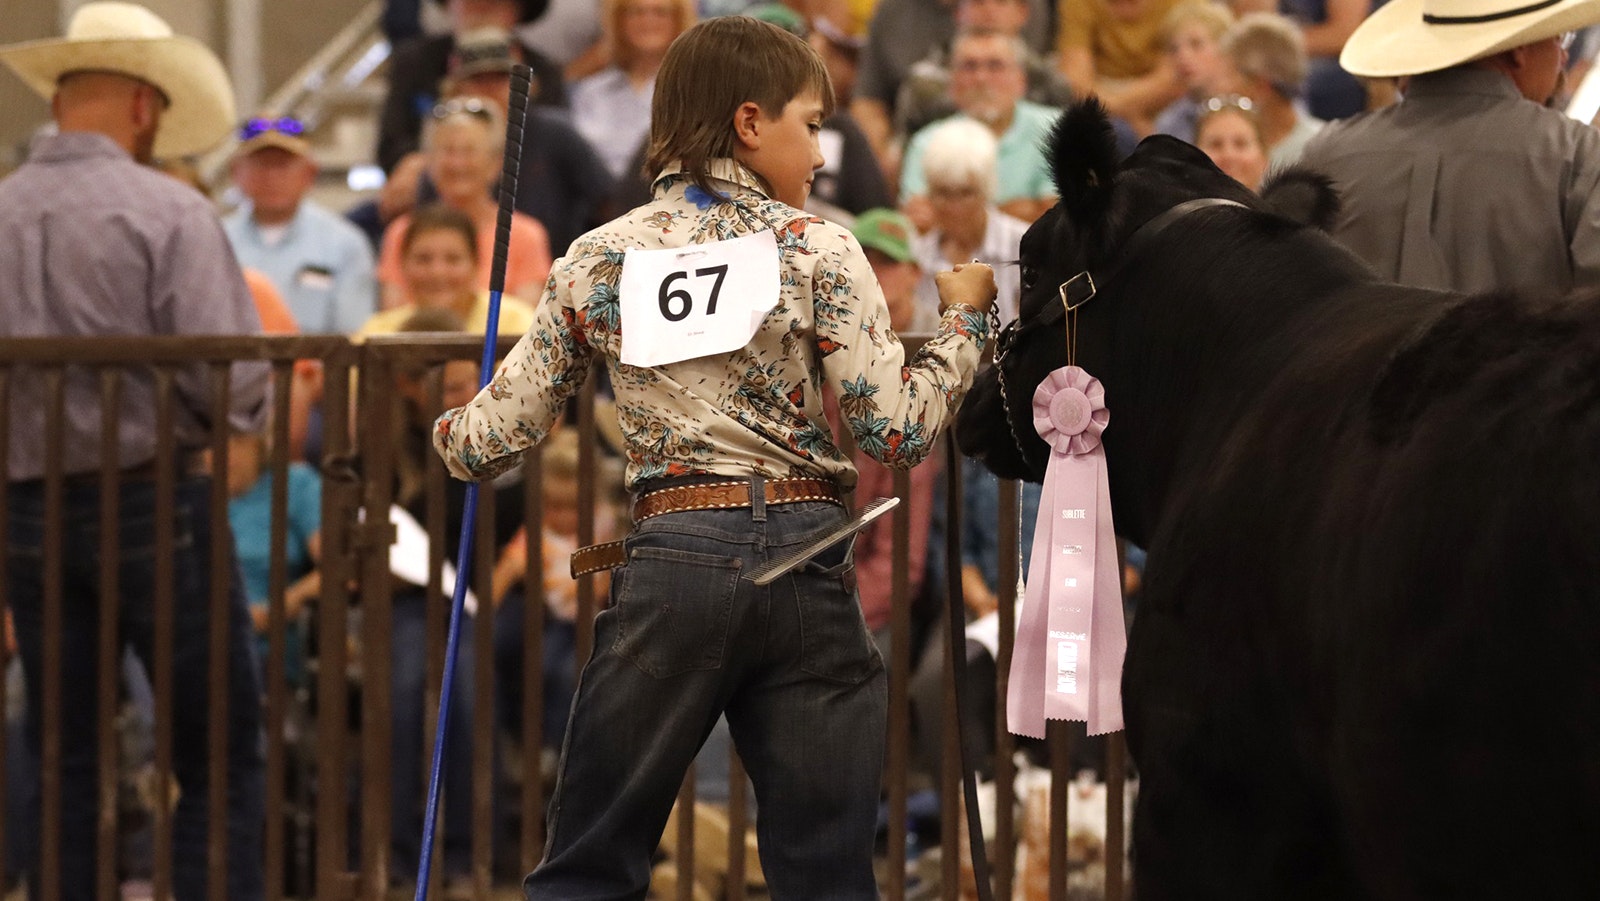 The glossy black coat of this beef sets off a prize ribbon nicely at the Sublette County Fair.